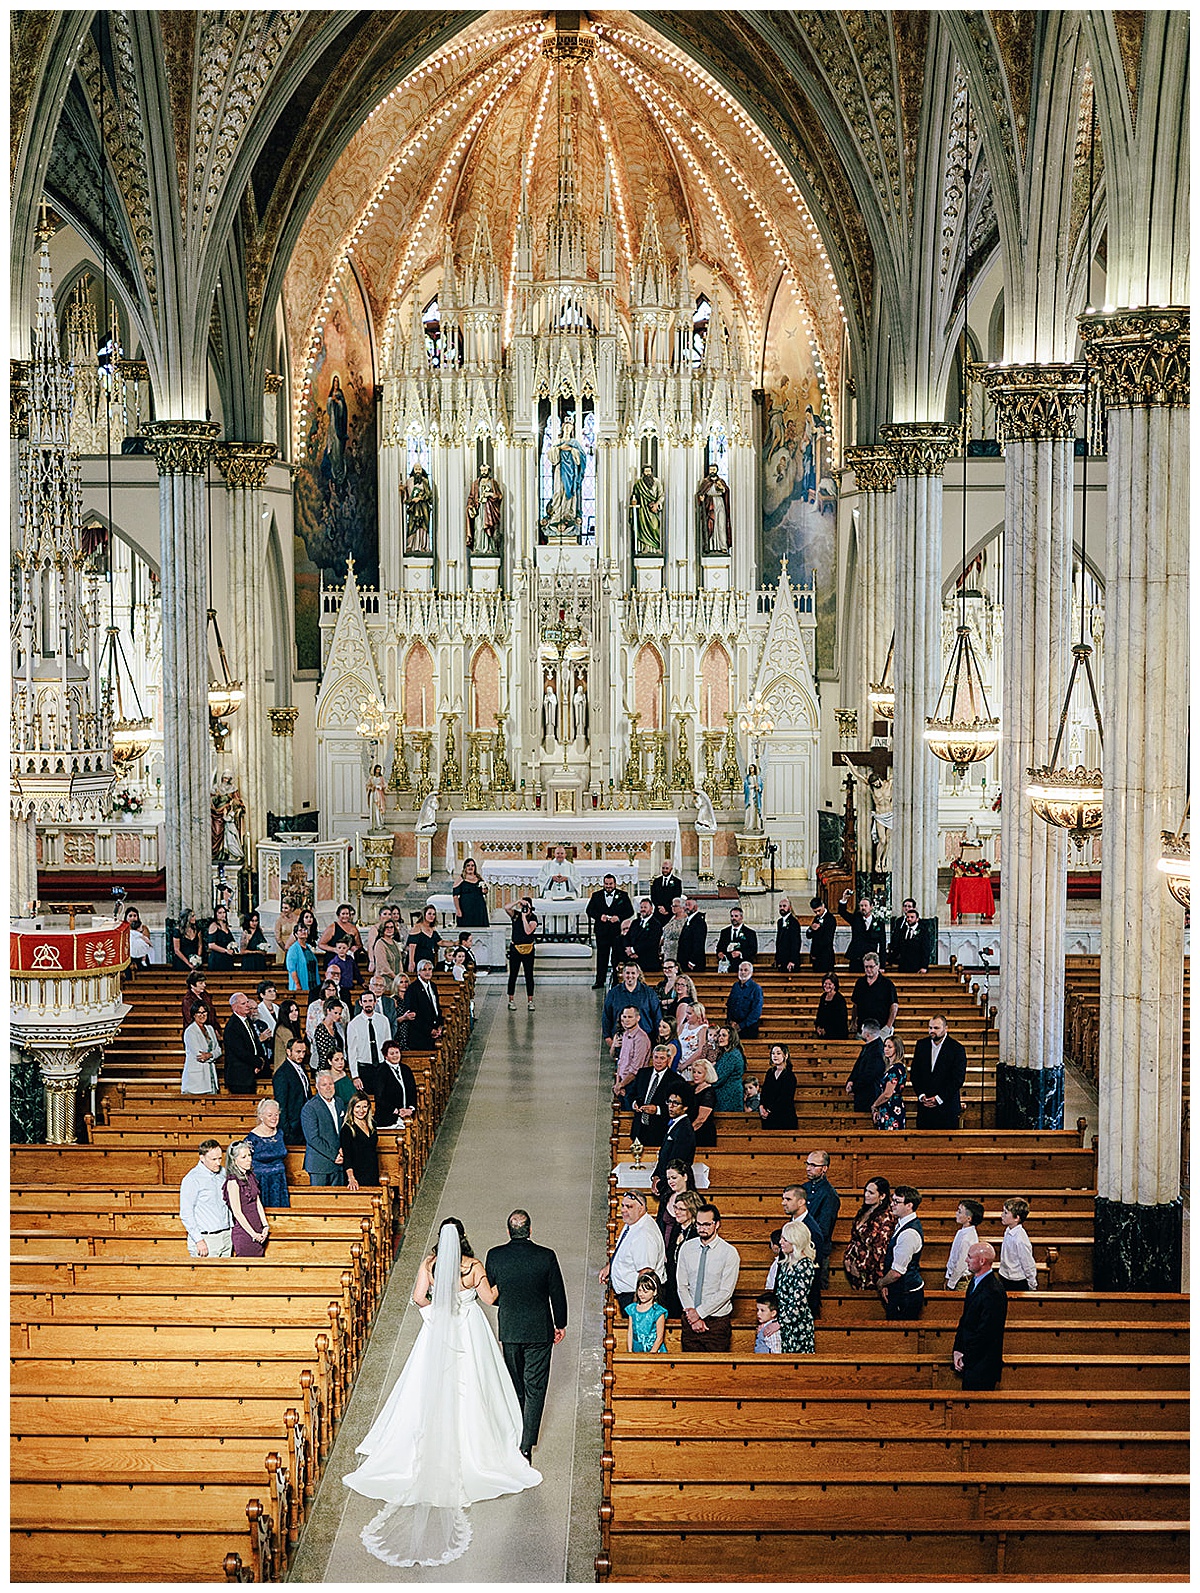 Stunning Cathedral by Kayla Bouren Photography